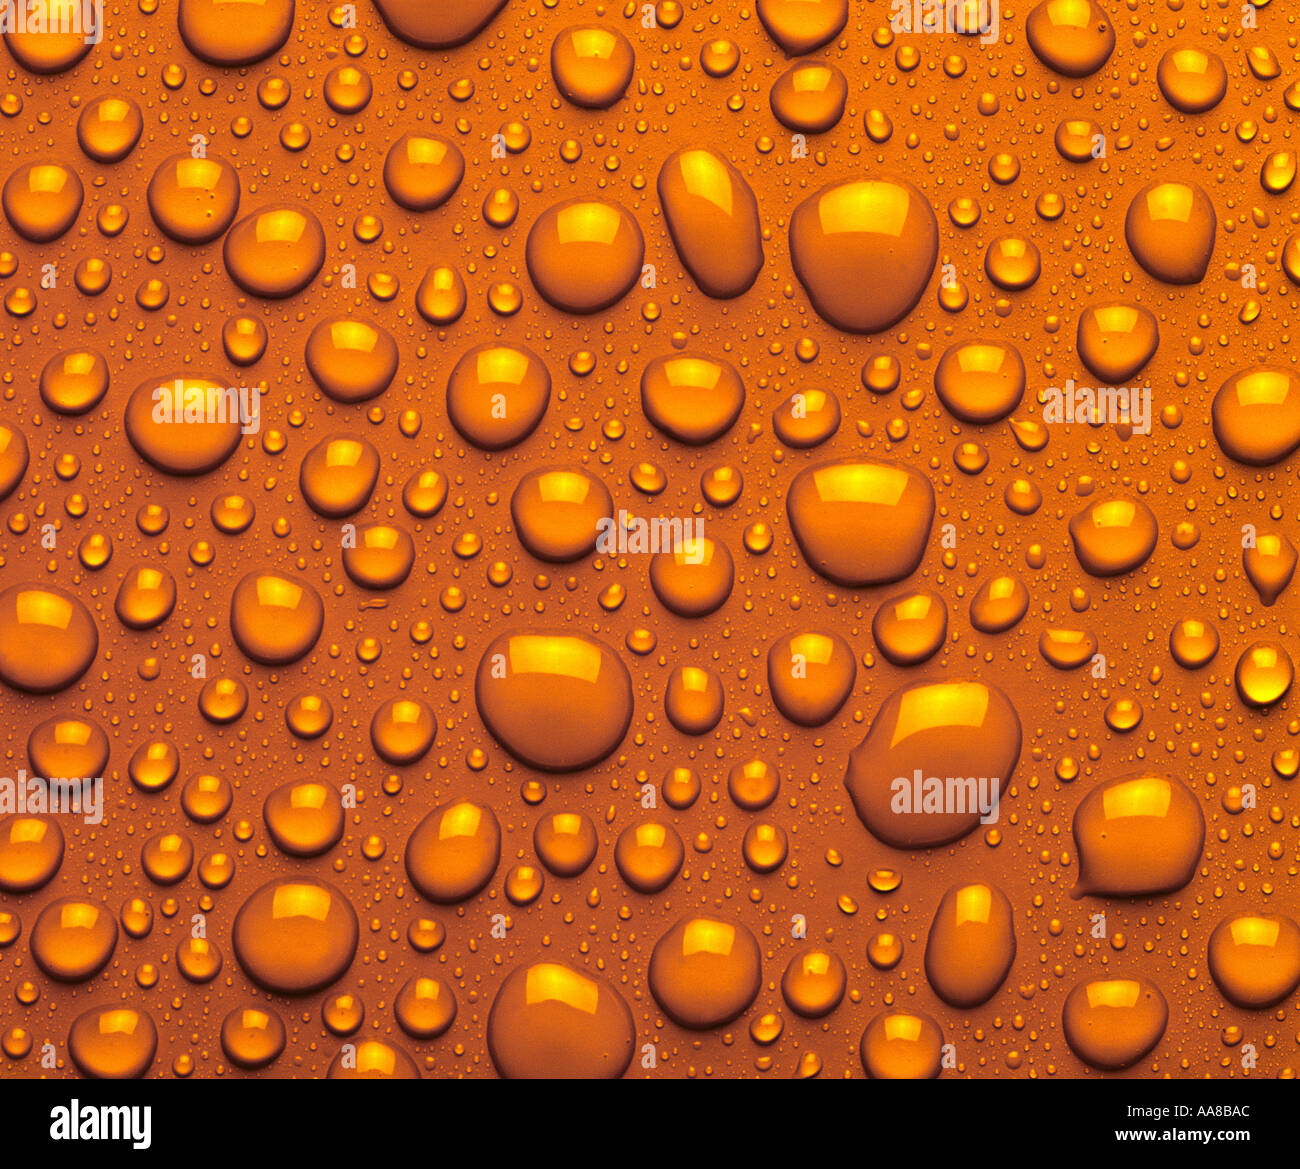 DROPLETS OF AMBER LIQUID ON AMBER SURFACE Stock Photo